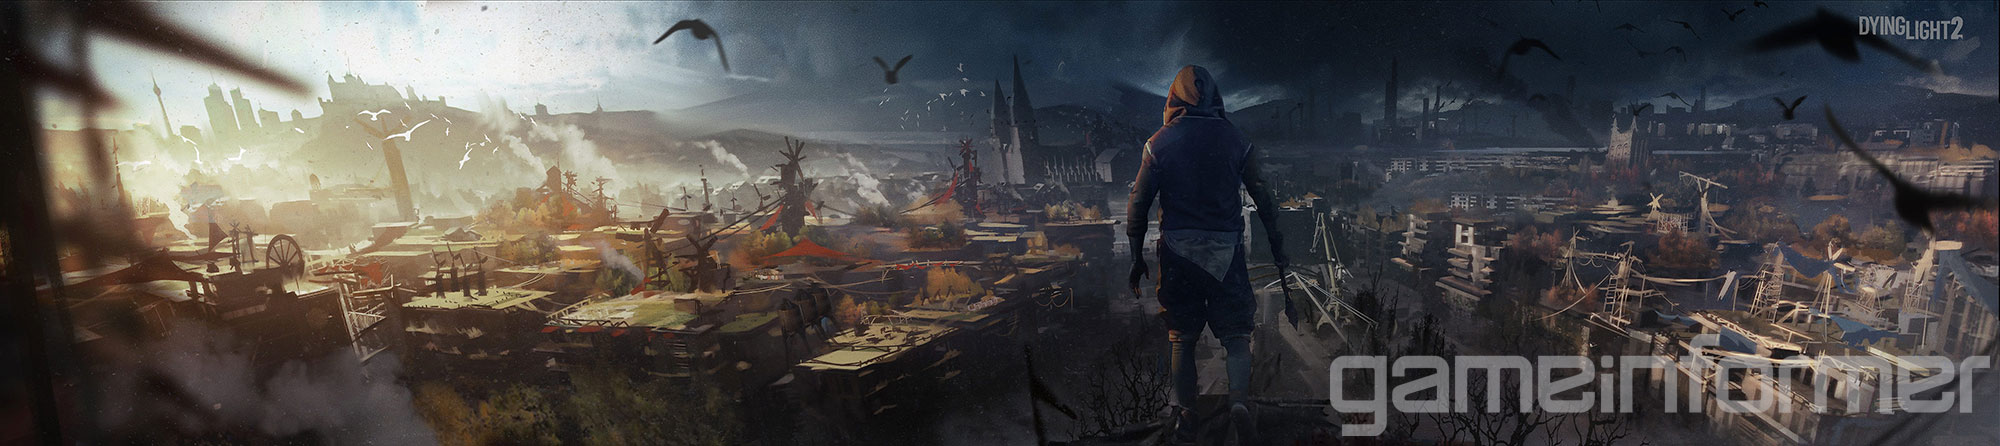 Dying Light 2 concept